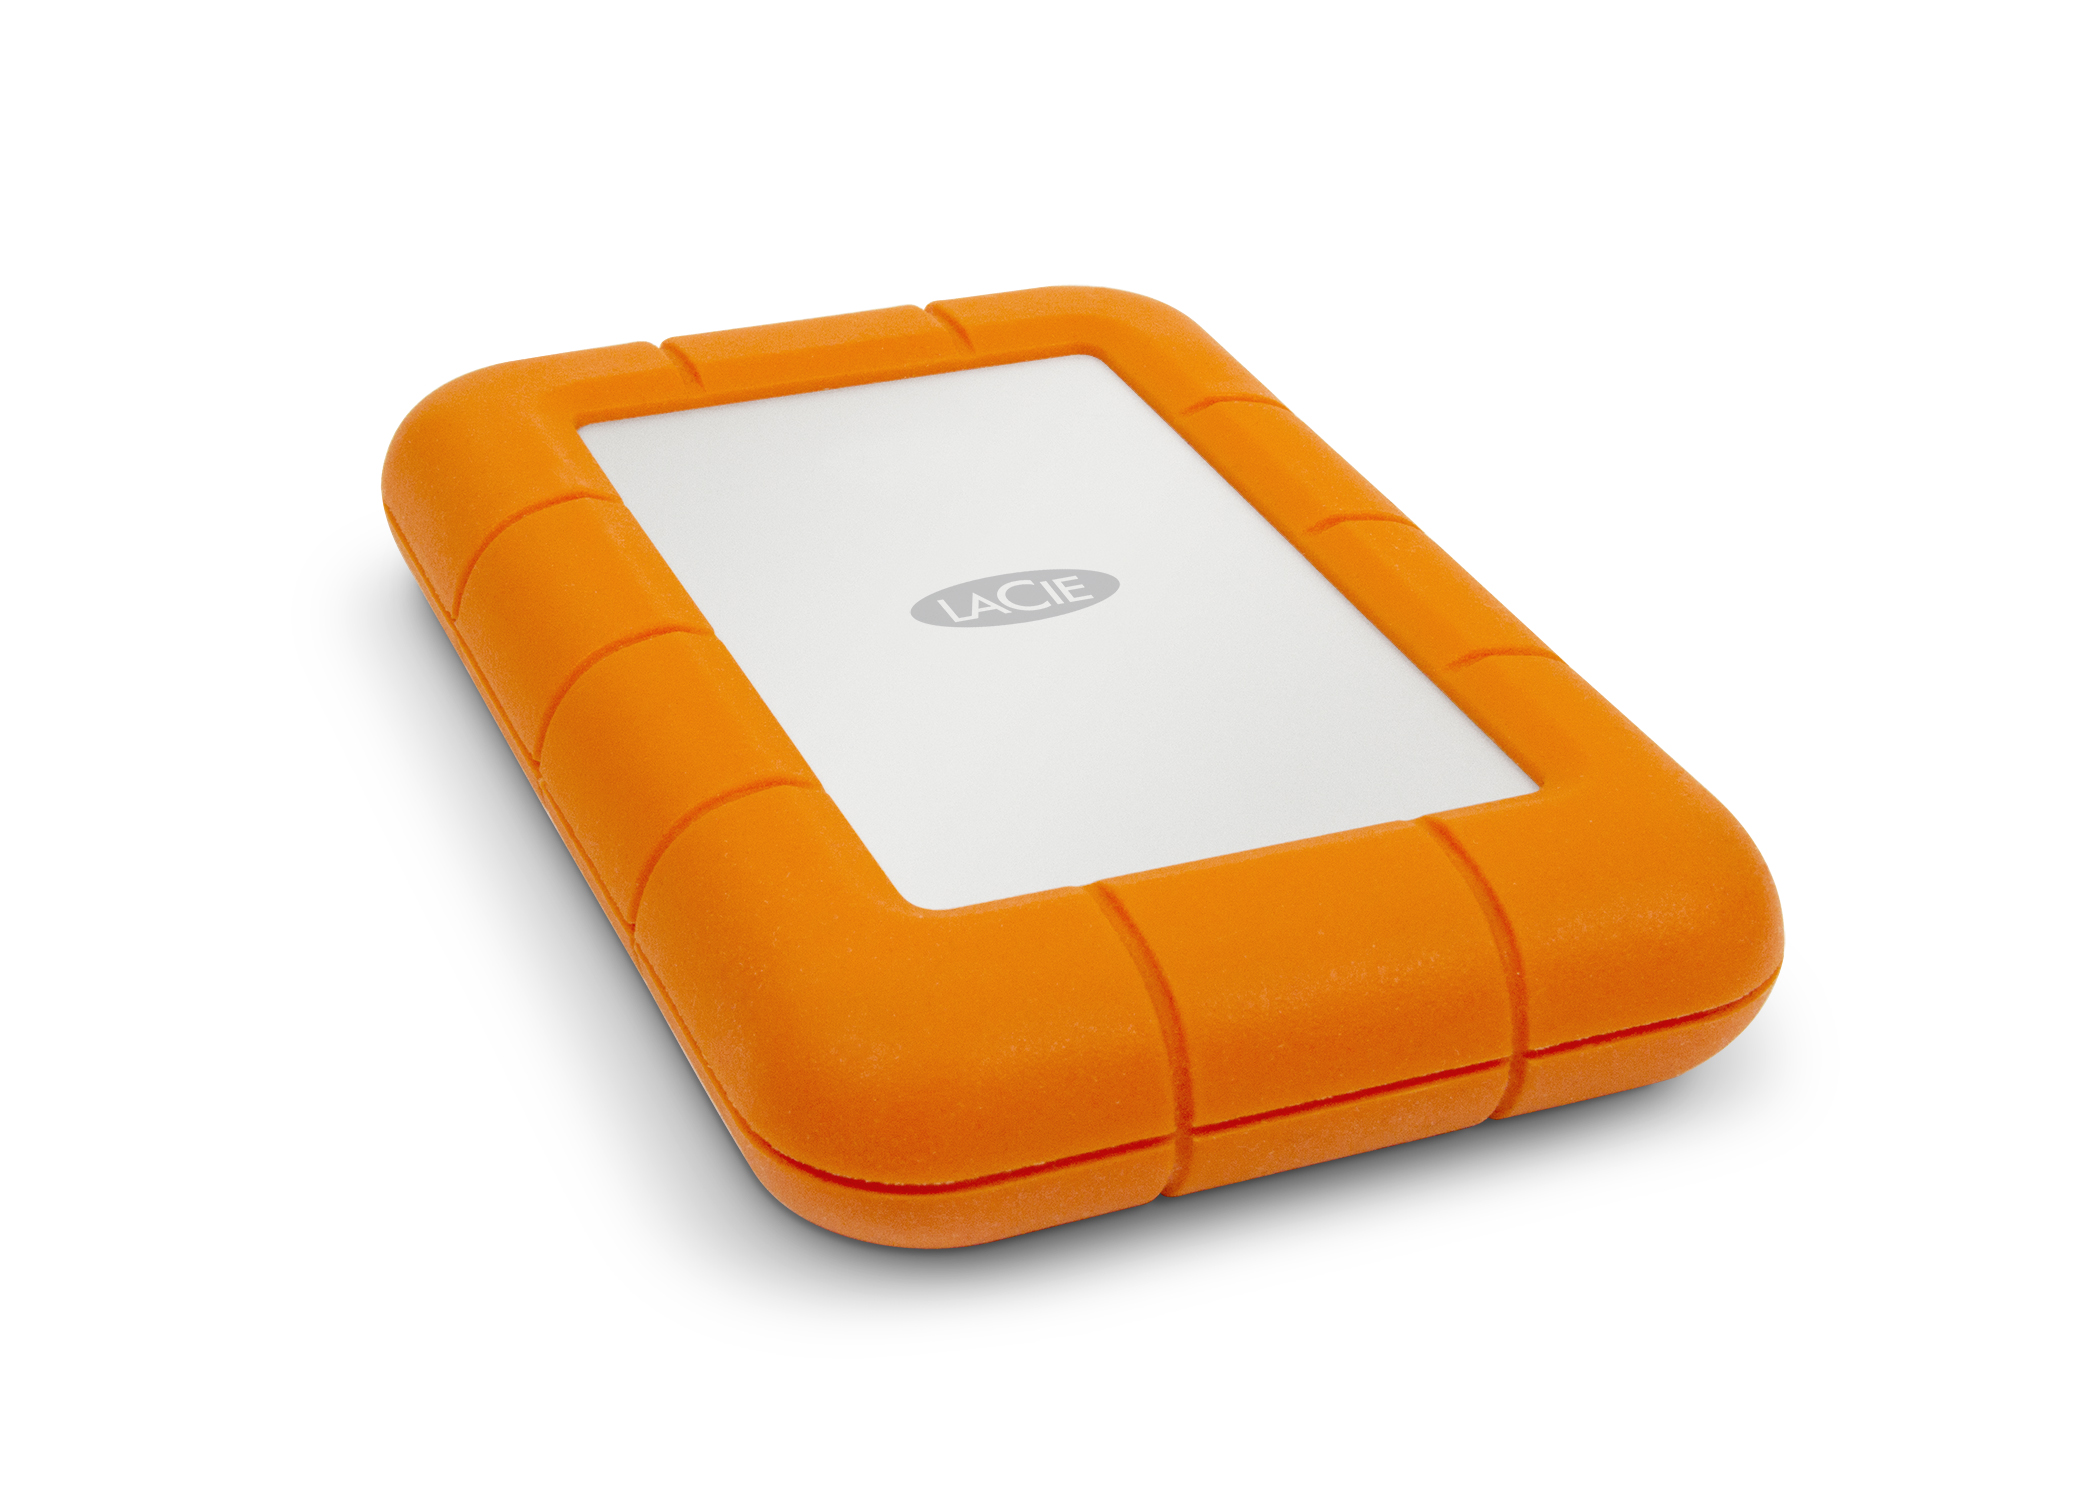 Media asset in full size related to 3dfxzone.it news item entitled as follows: USB 3.0 e Thunderbolt insieme nel nuovo drive Rugged di LaCie | Image Name: news18122_Lacie-Rugged-USB-3.0-Thunderbolt_1.jpg